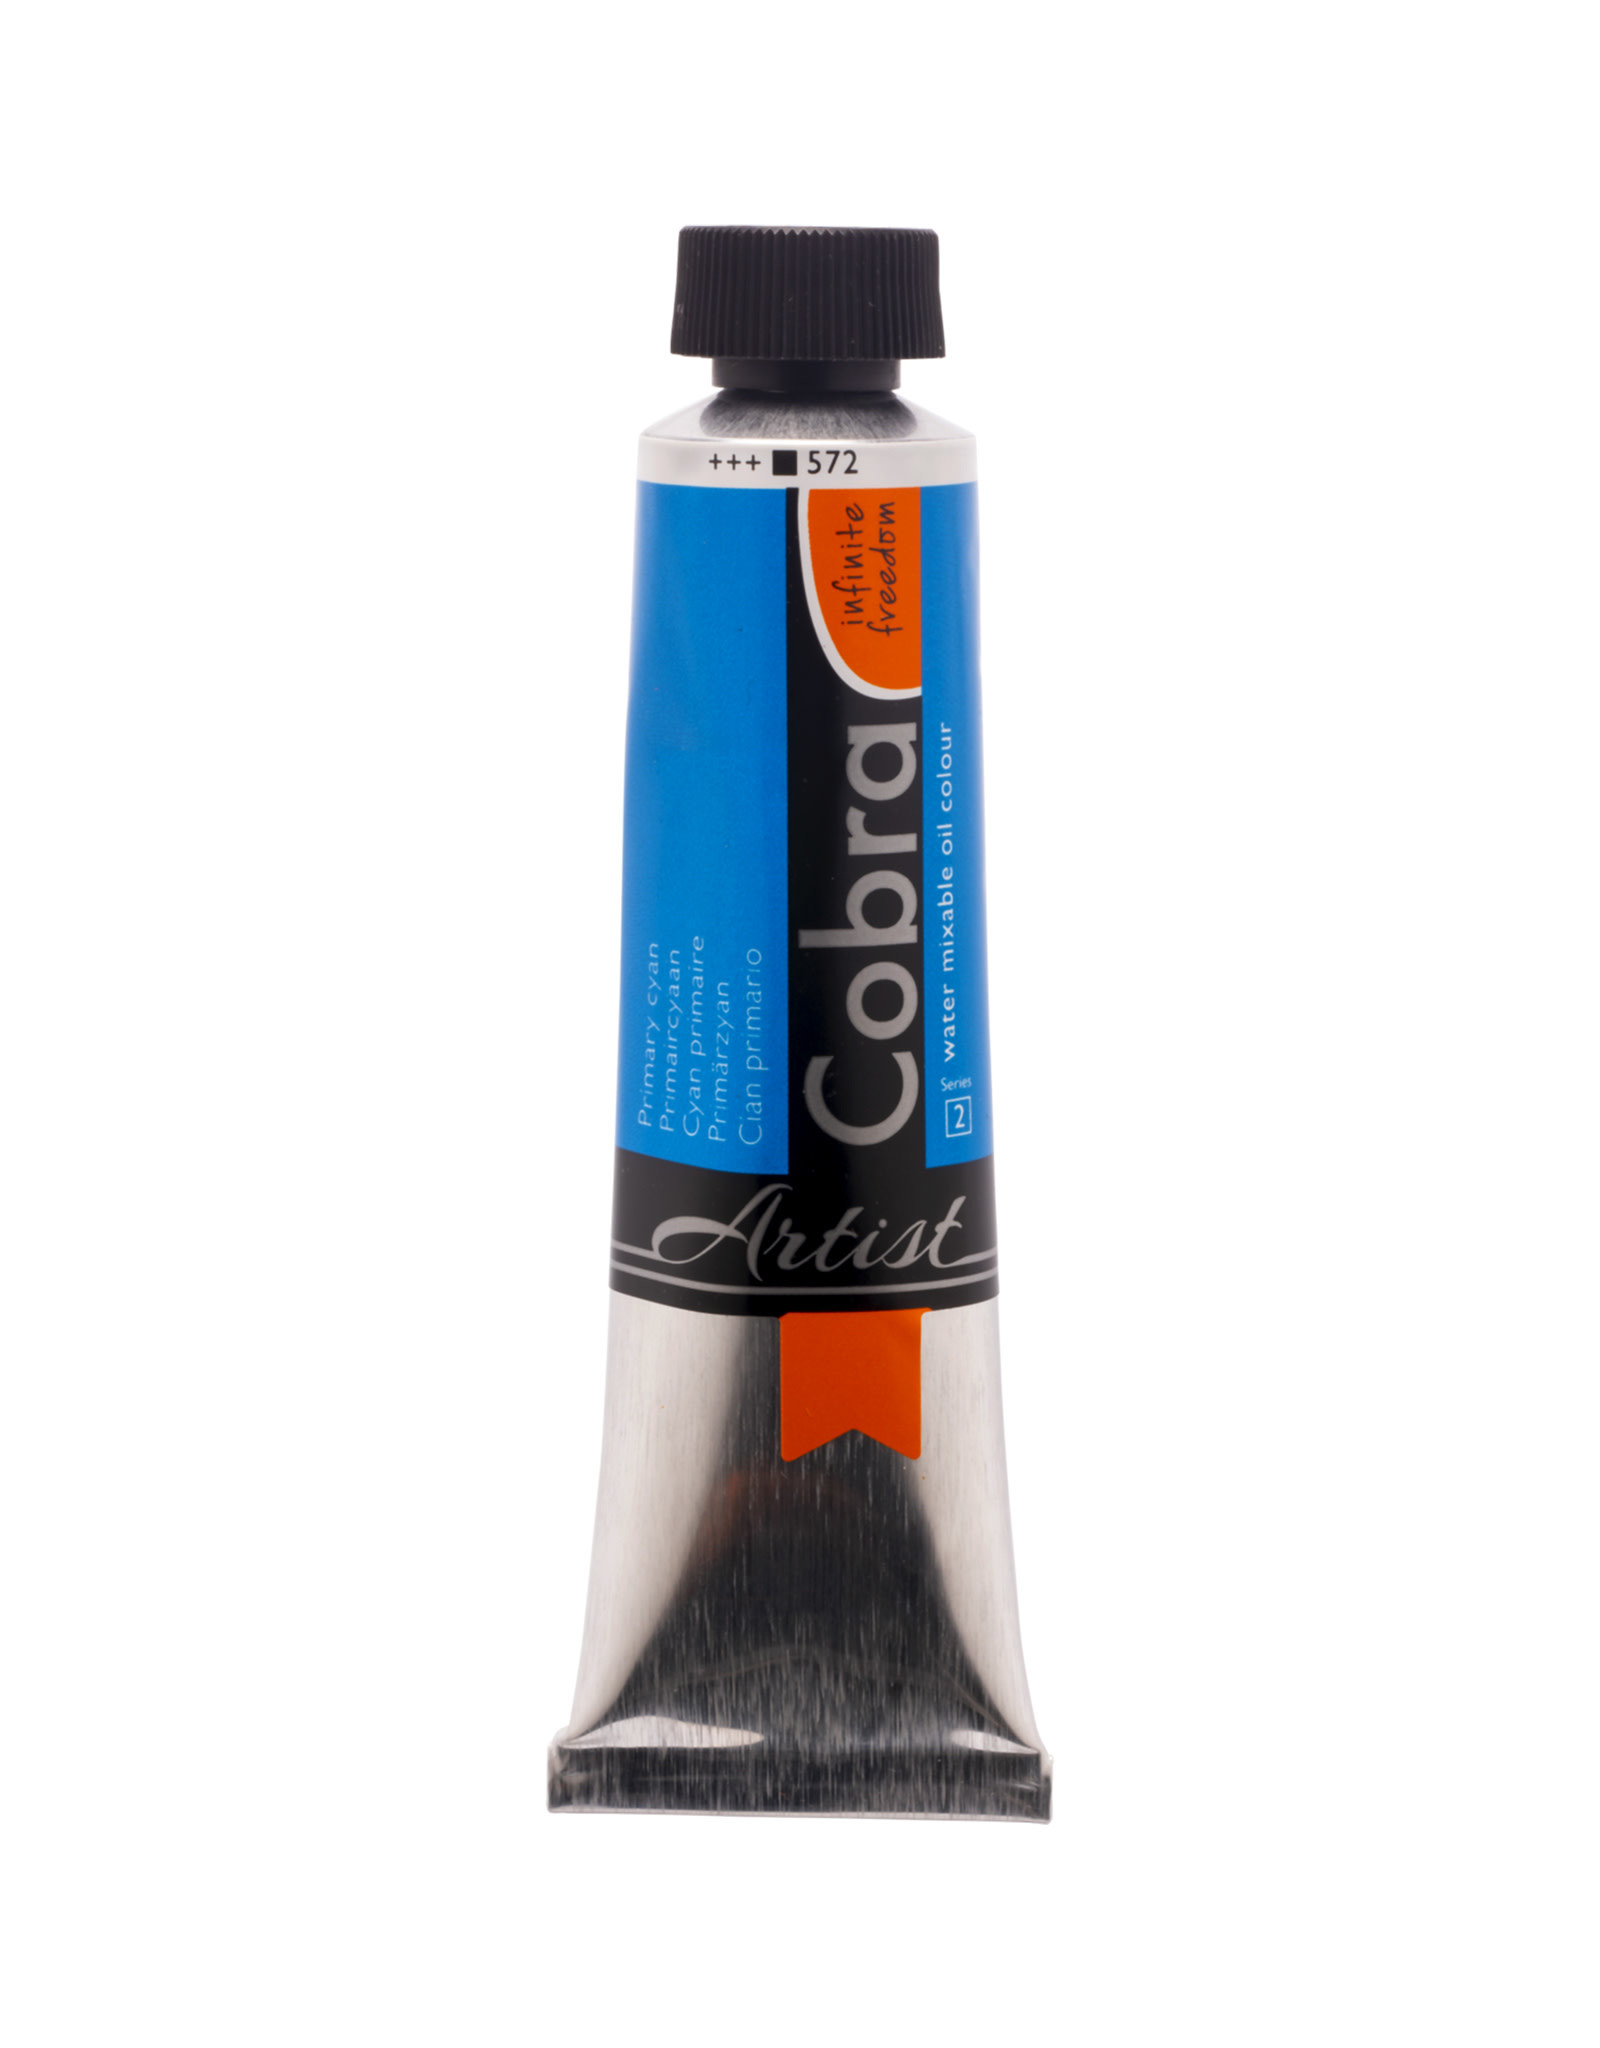 Royal Talens Cobra Water Mixable Artist Oils, Primary Cyan 40ml